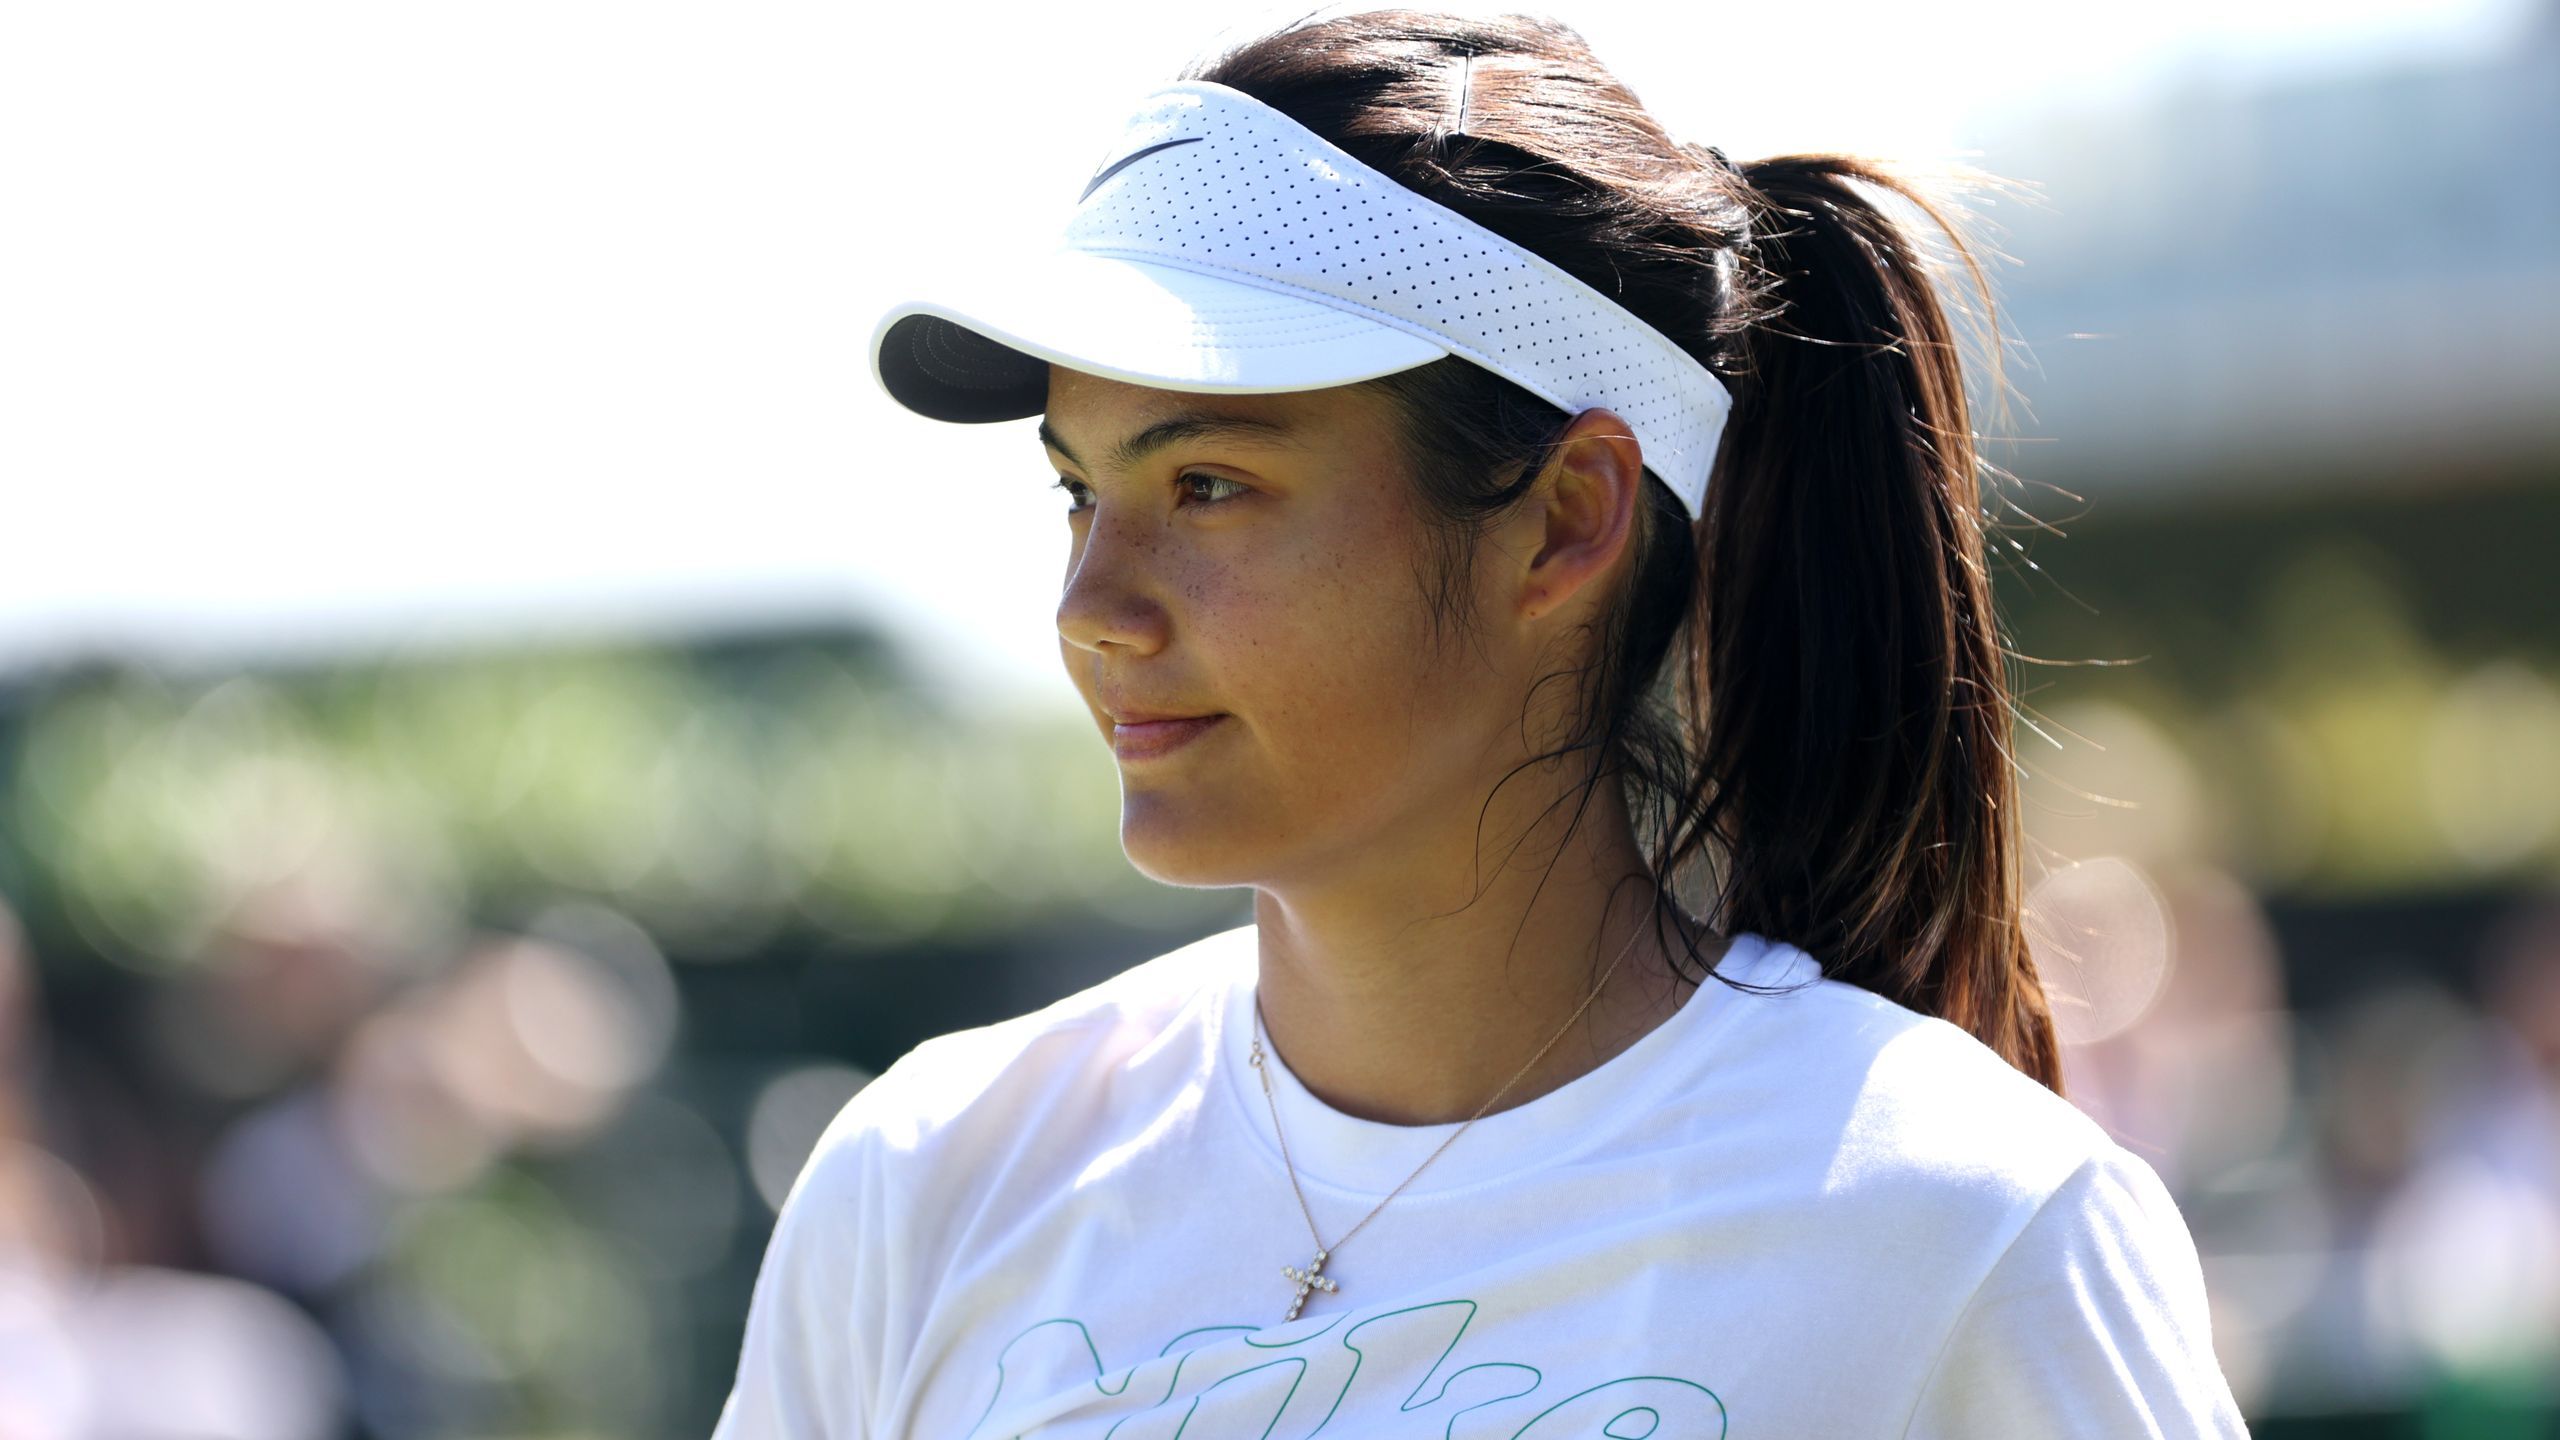 Read more about the article Emma Raducanu hopes “hero” Andy Murray makes it to Wimbledon and praises “quite spectacular” progress by British players